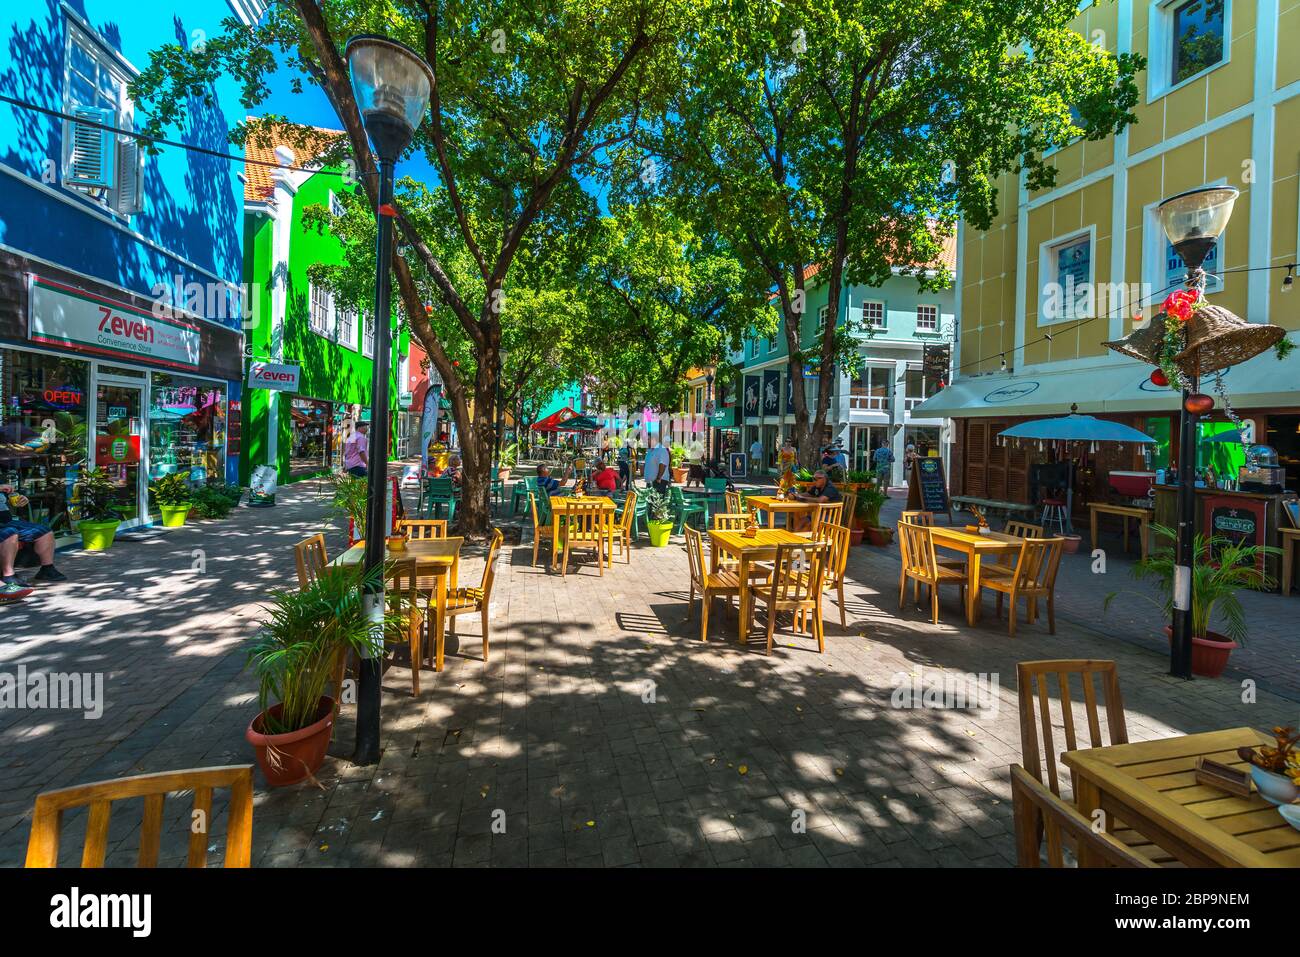 City Center of Willemstad, Curacao Stock Photo